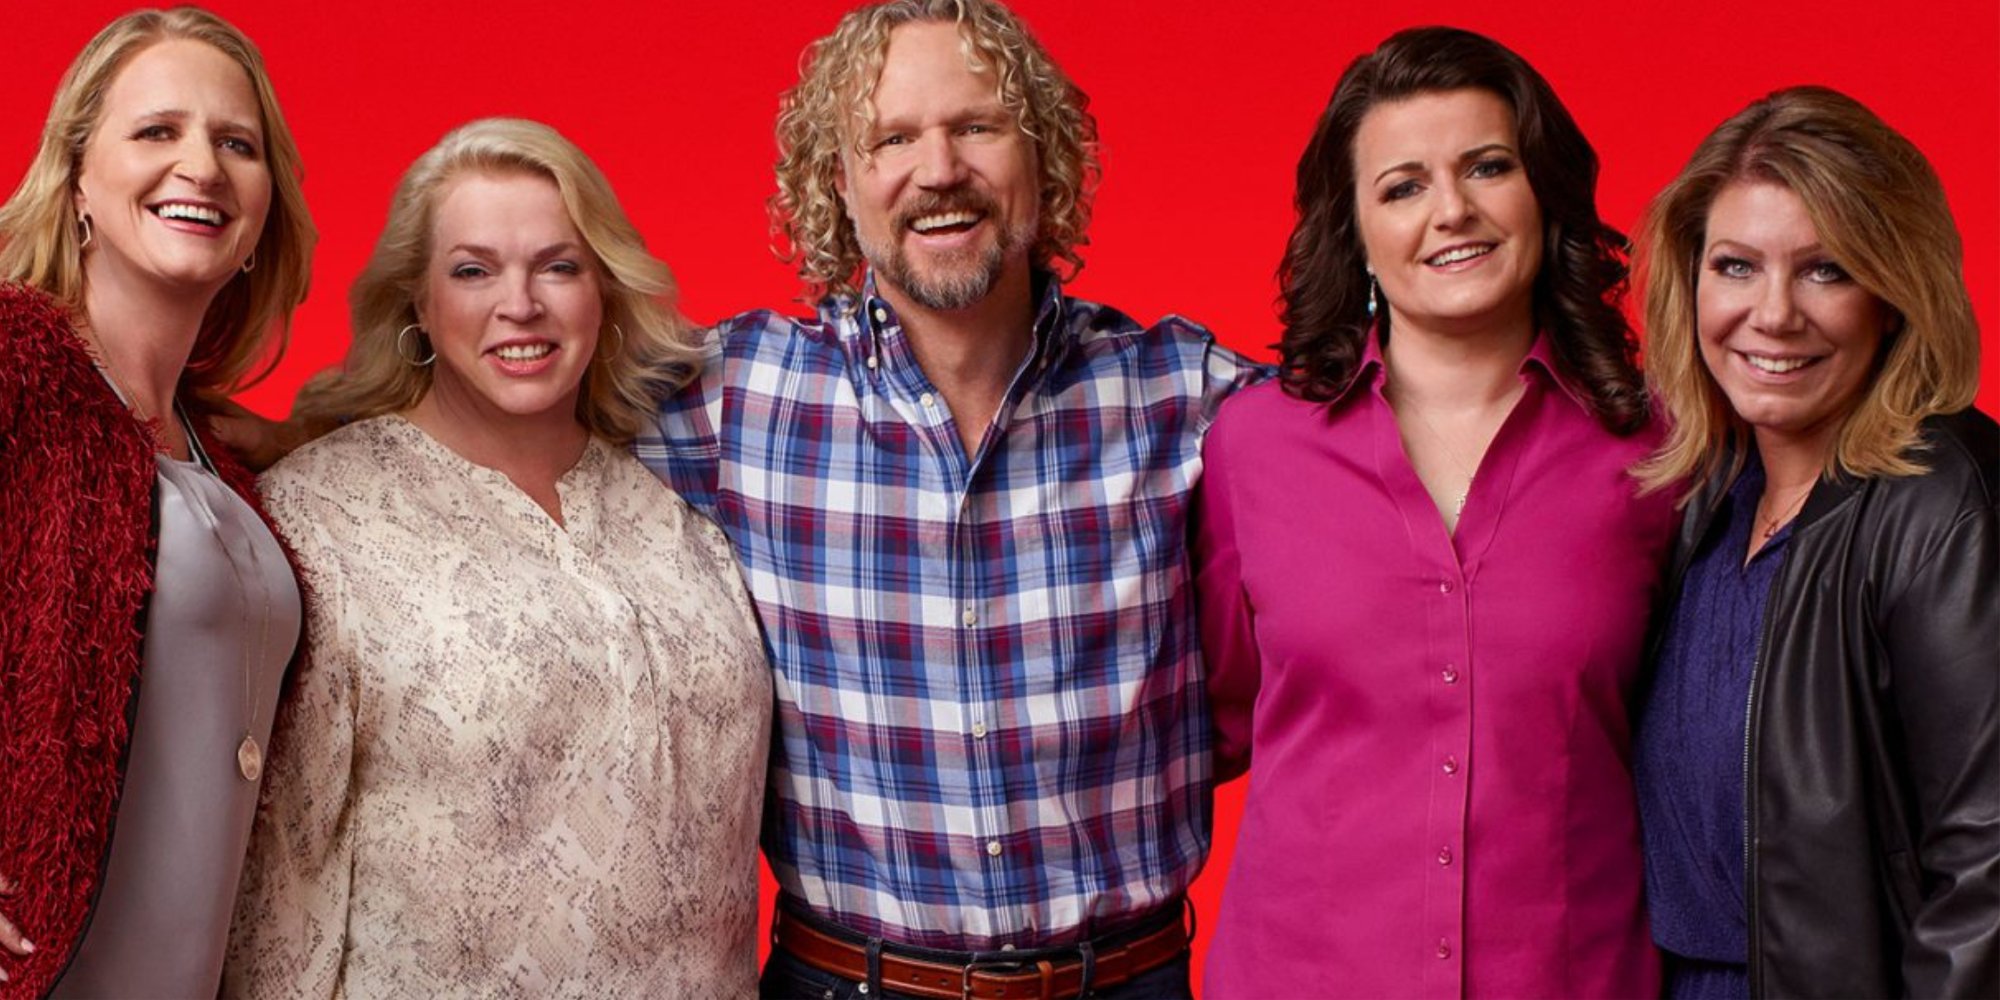 'Sister Wives' A Complete Timeline of the Breakdown of Christine and